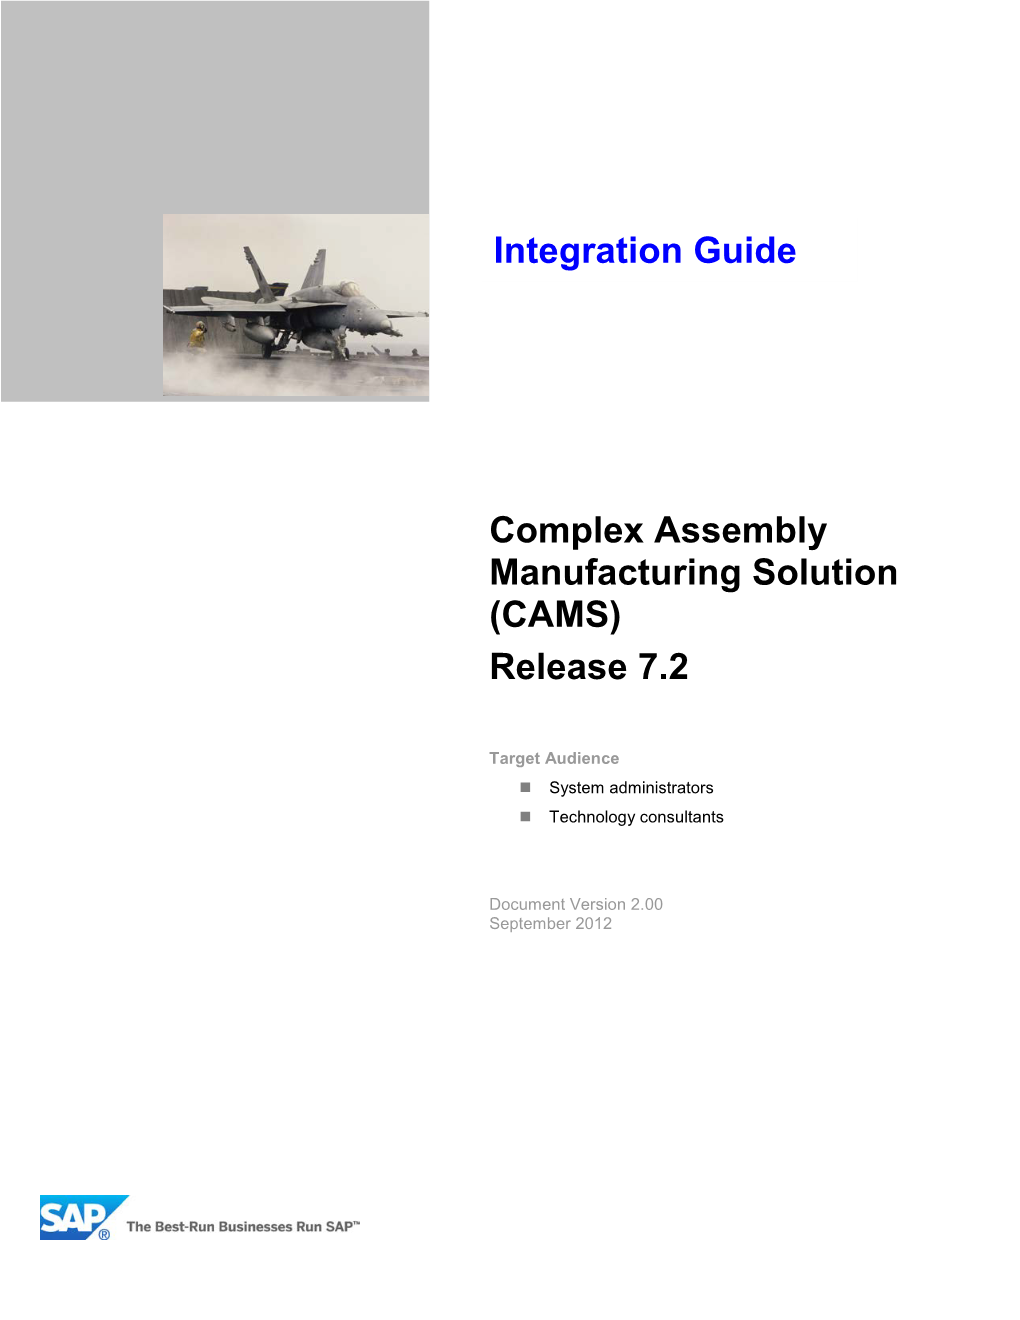 CAMS Integration Guide